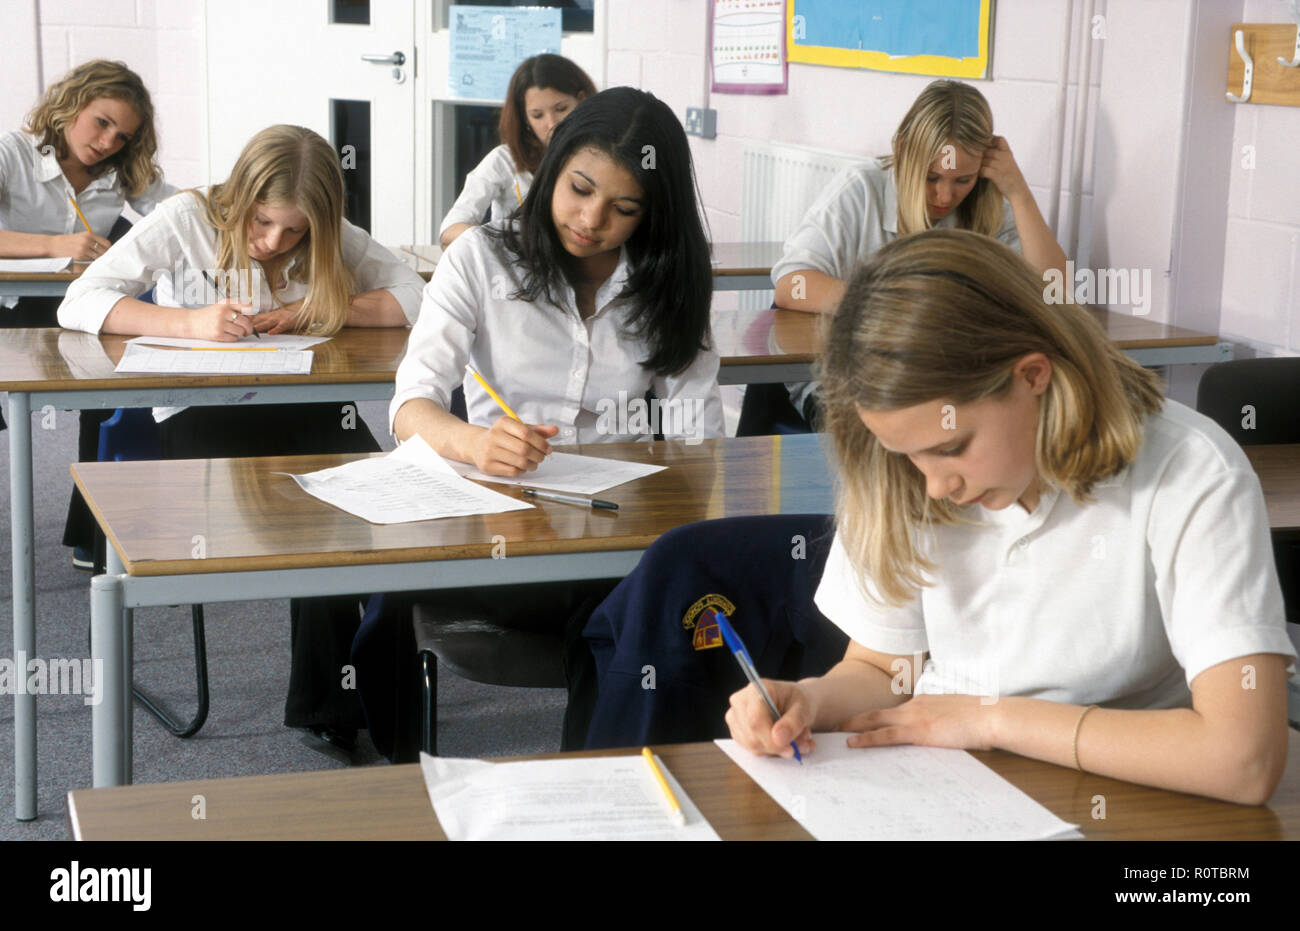 high school girls engaged in exam or test Stock Photo